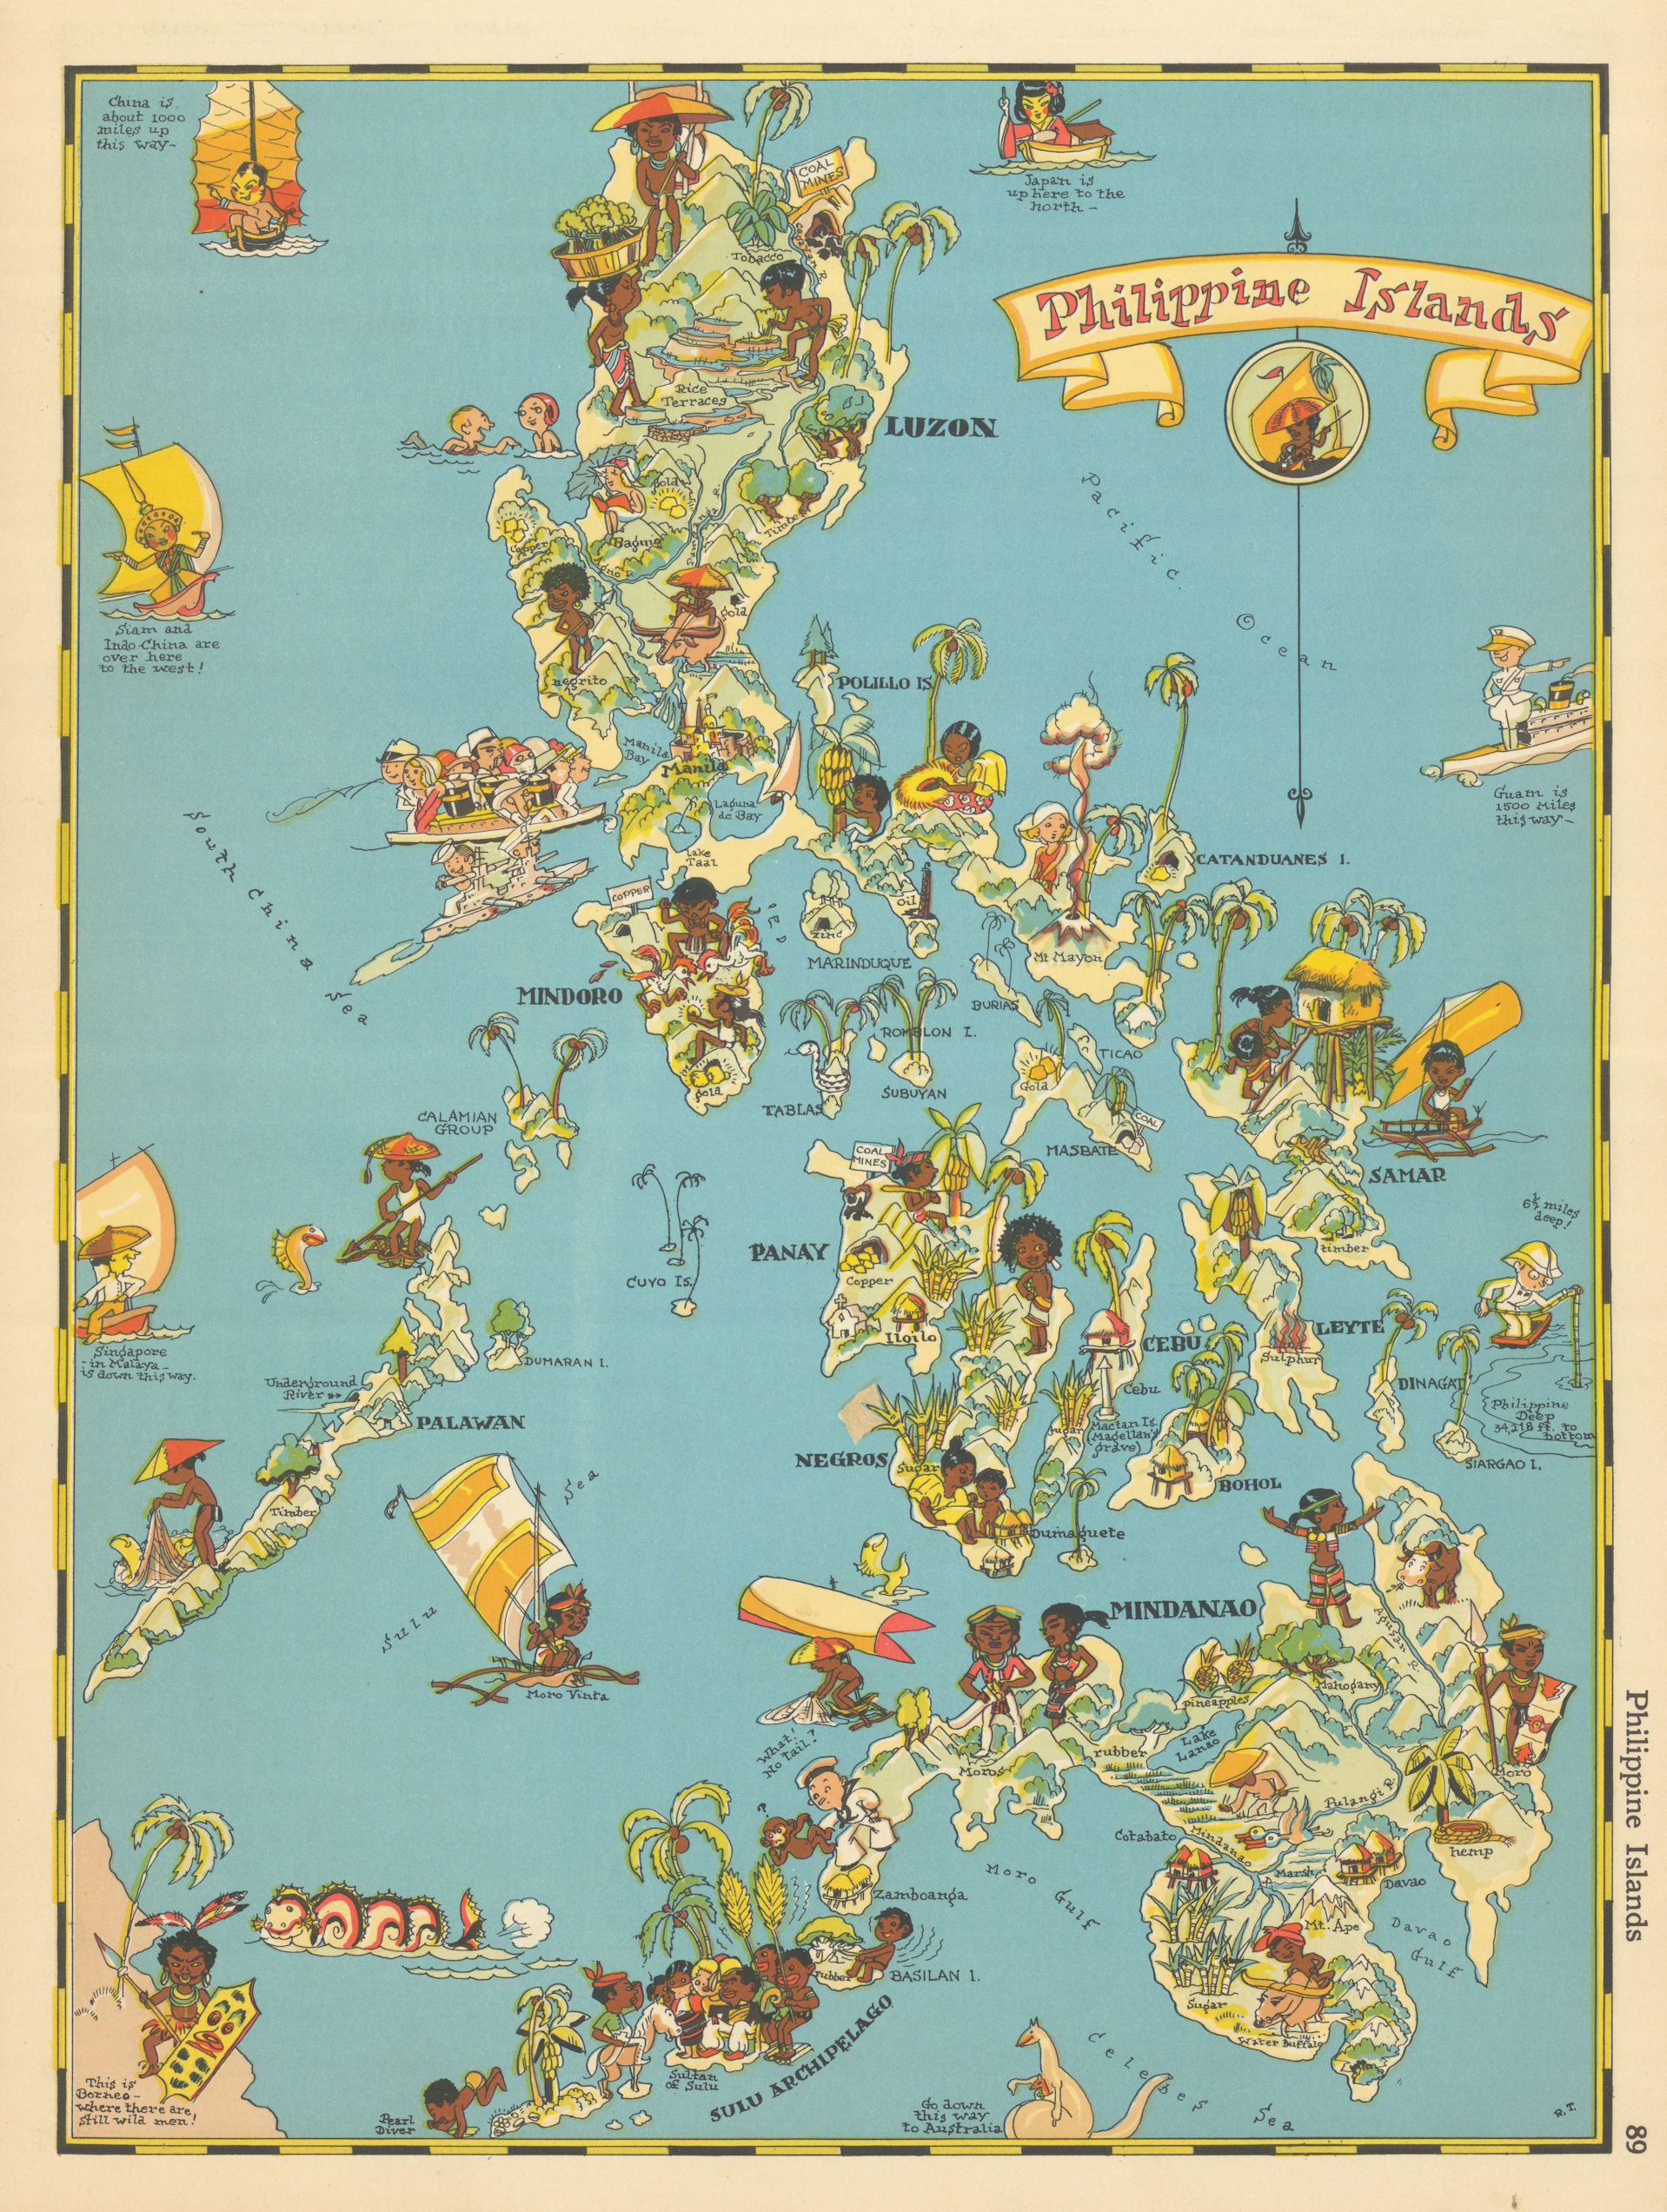 Associate Product Philippine Islands. Pictorial map by Ruth Taylor White 1935 old vintage